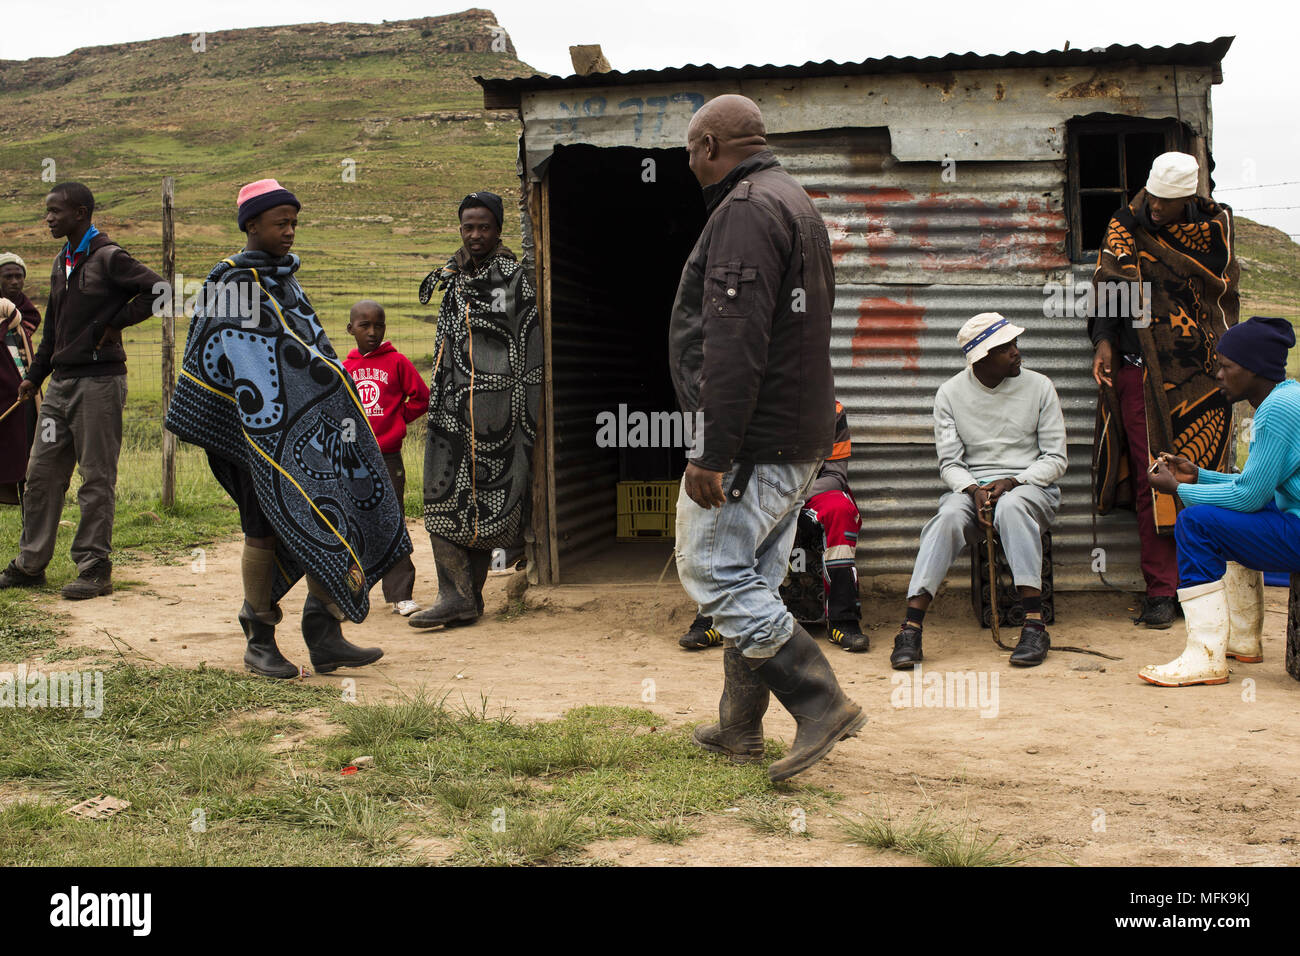 February 26, 2017 - Matatiele, Eastern Cape, South Africa - Xhosa and Sotho men from two neighbouring villages meet to participate in a horse race (Credit Image: © Stefan Kleinowitz via ZUMA Wire) Stock Photo